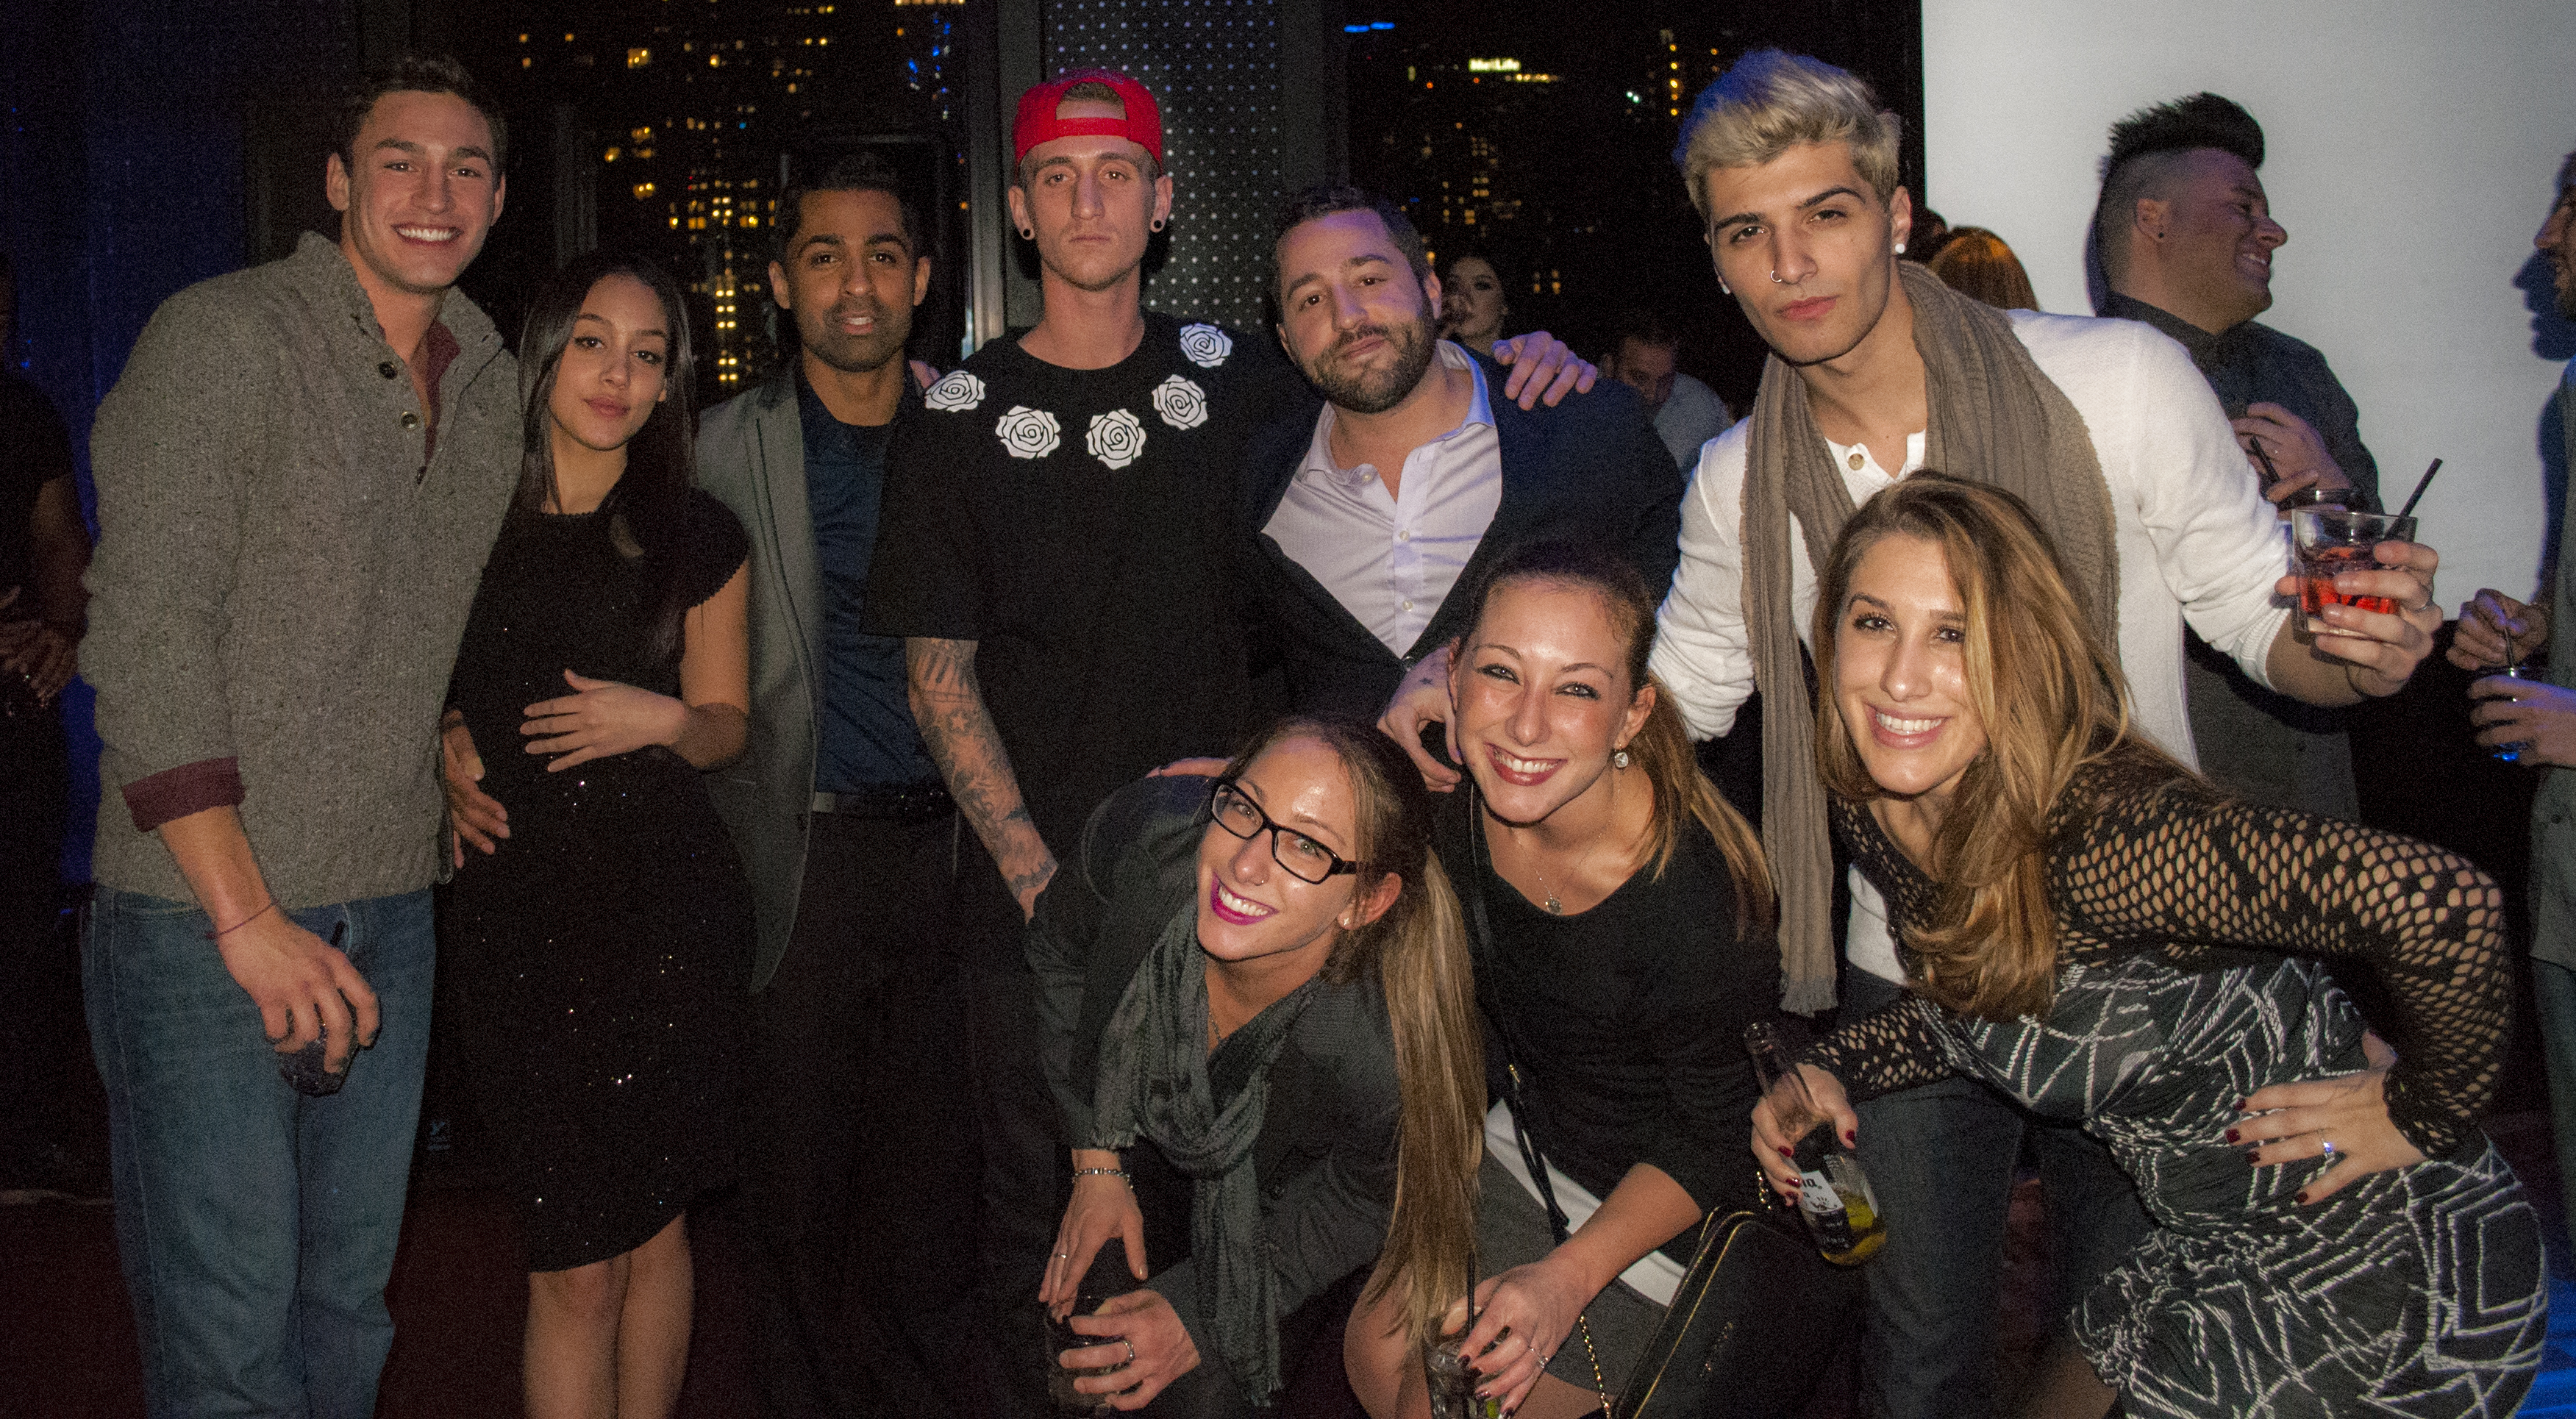 Real World Skeletons NYC Premiere Party at 230 Fifth Hosted by Staten Island’s Nicole Zanatta